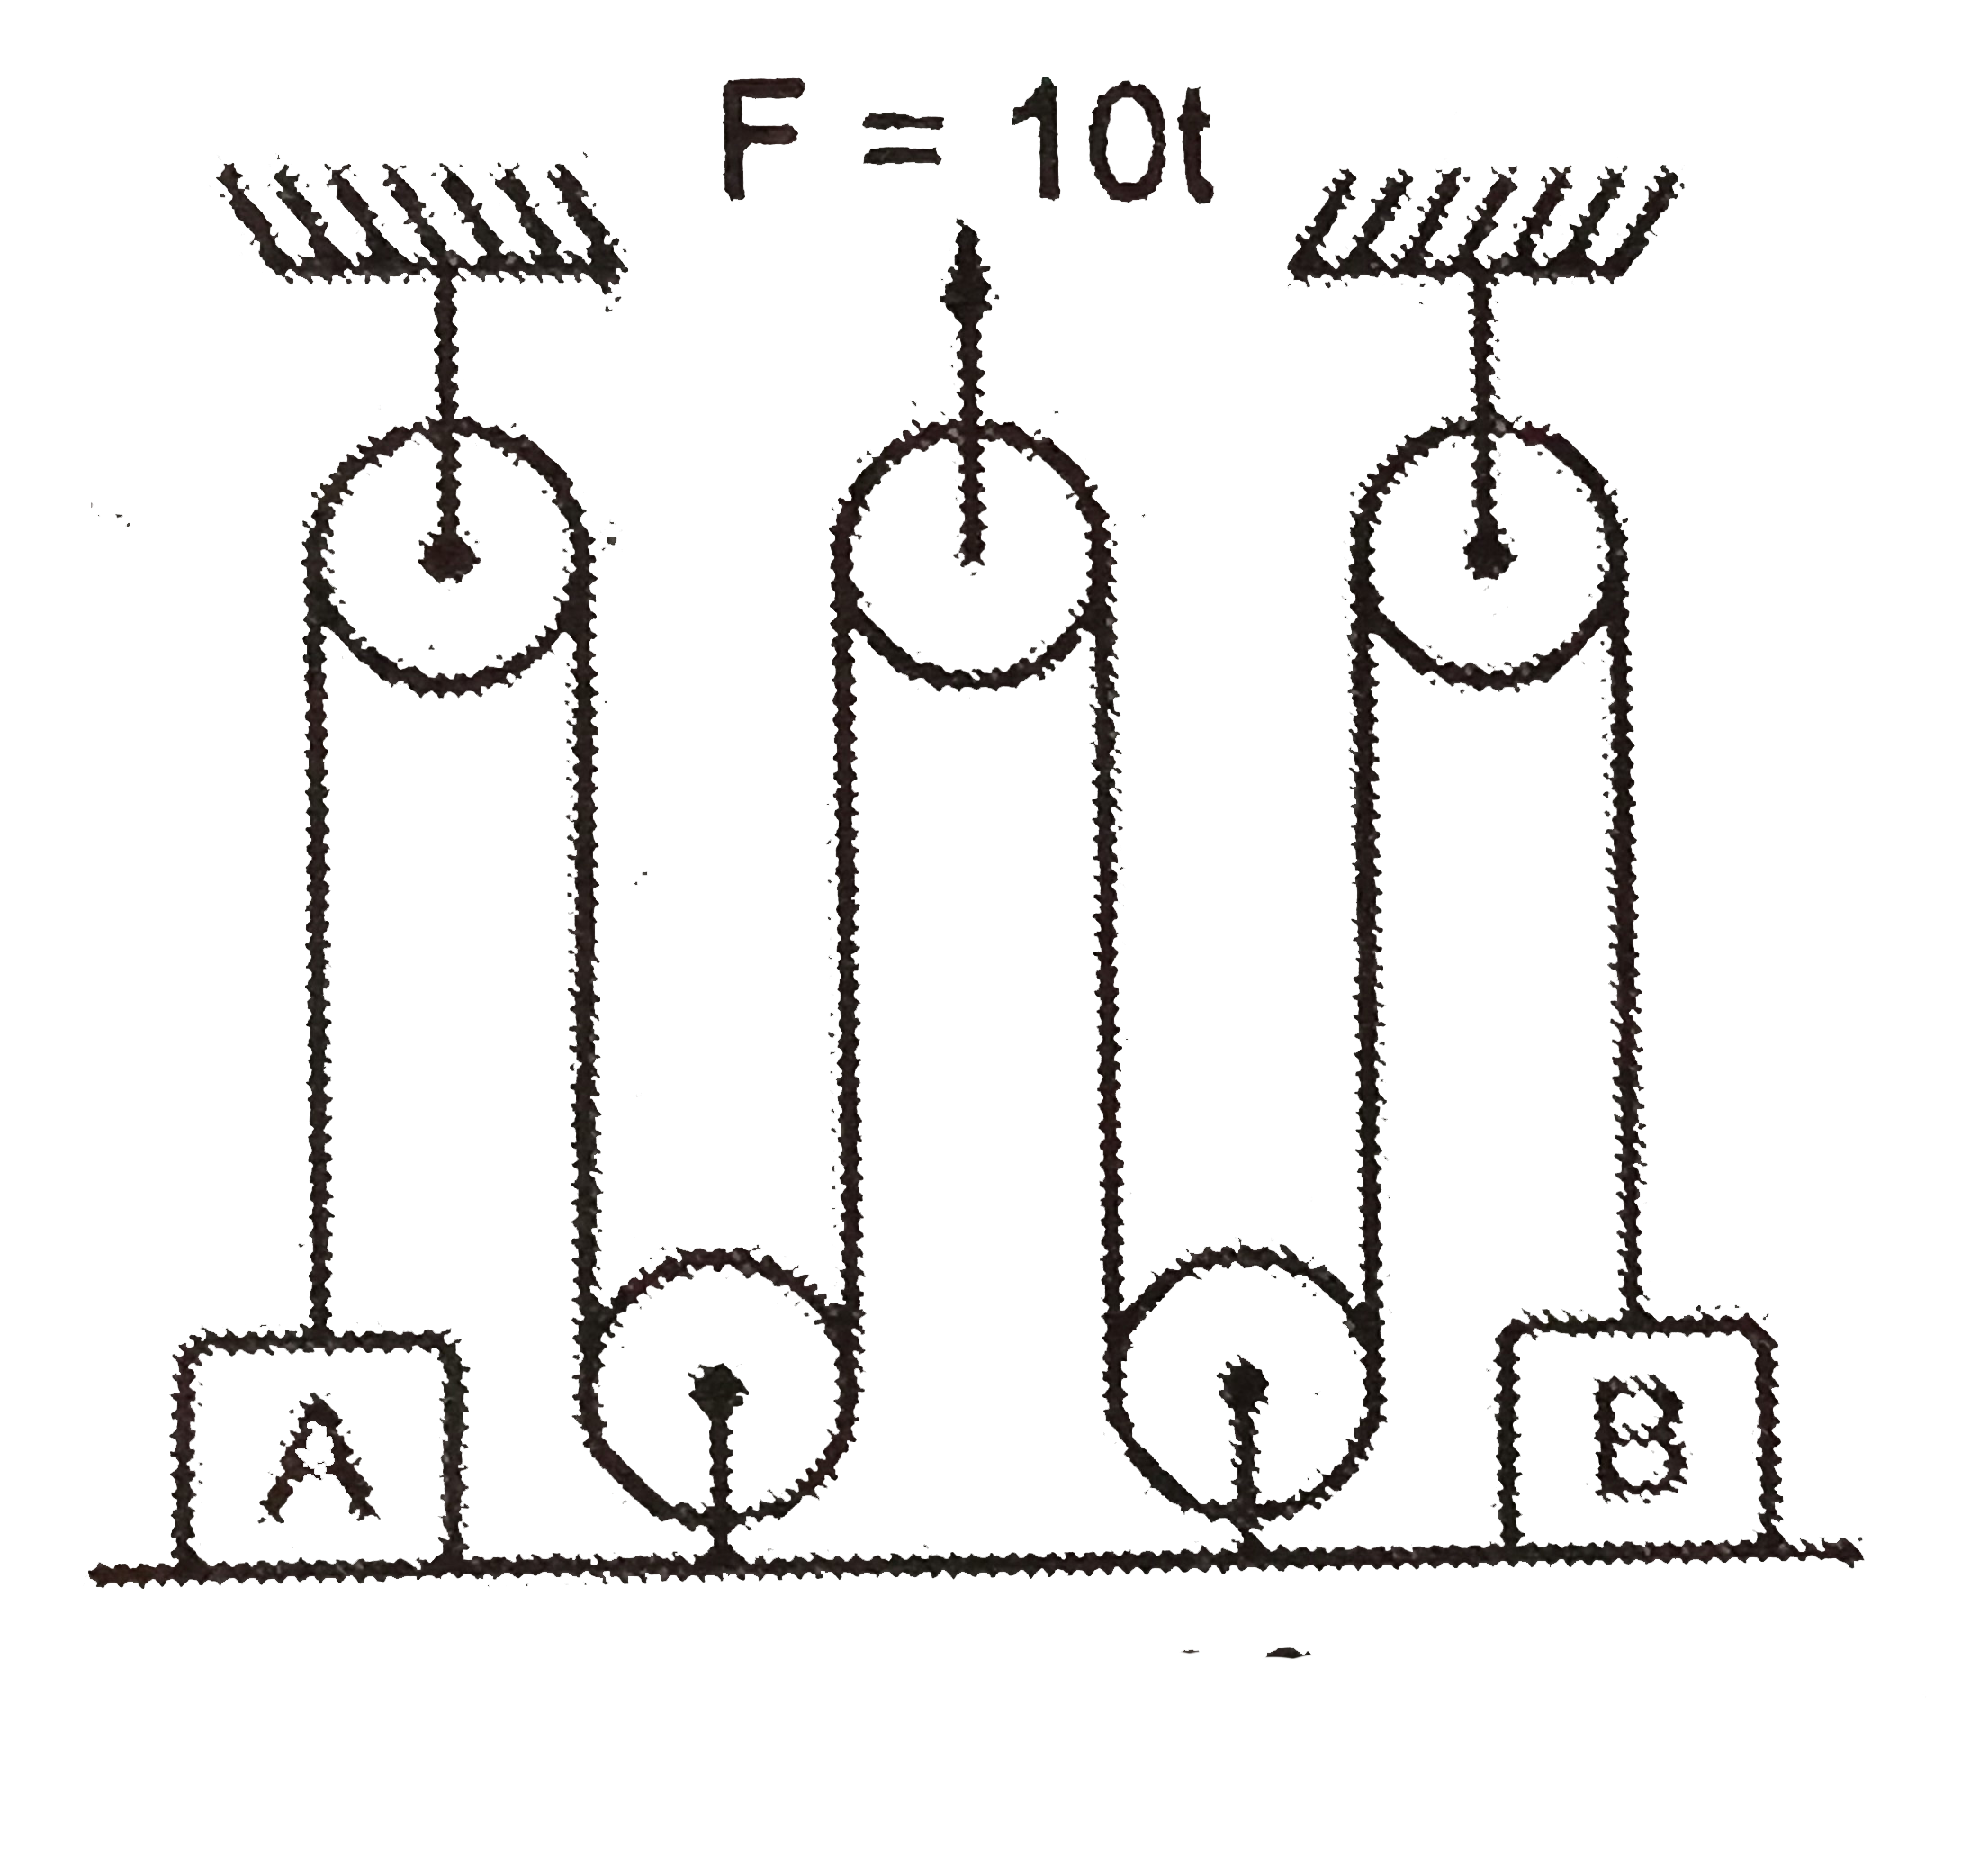 In the arrangement shown in figure, m(A) = 1 kg and m(B) = 2 kg, while all the pulleys and strings are massless and frictionless. At t = 0, a force F = 10 t starts acting over central pulley in vertically upward direction. If the velocity of A is x xx 10 m//s when B loses contact with floor, find x.